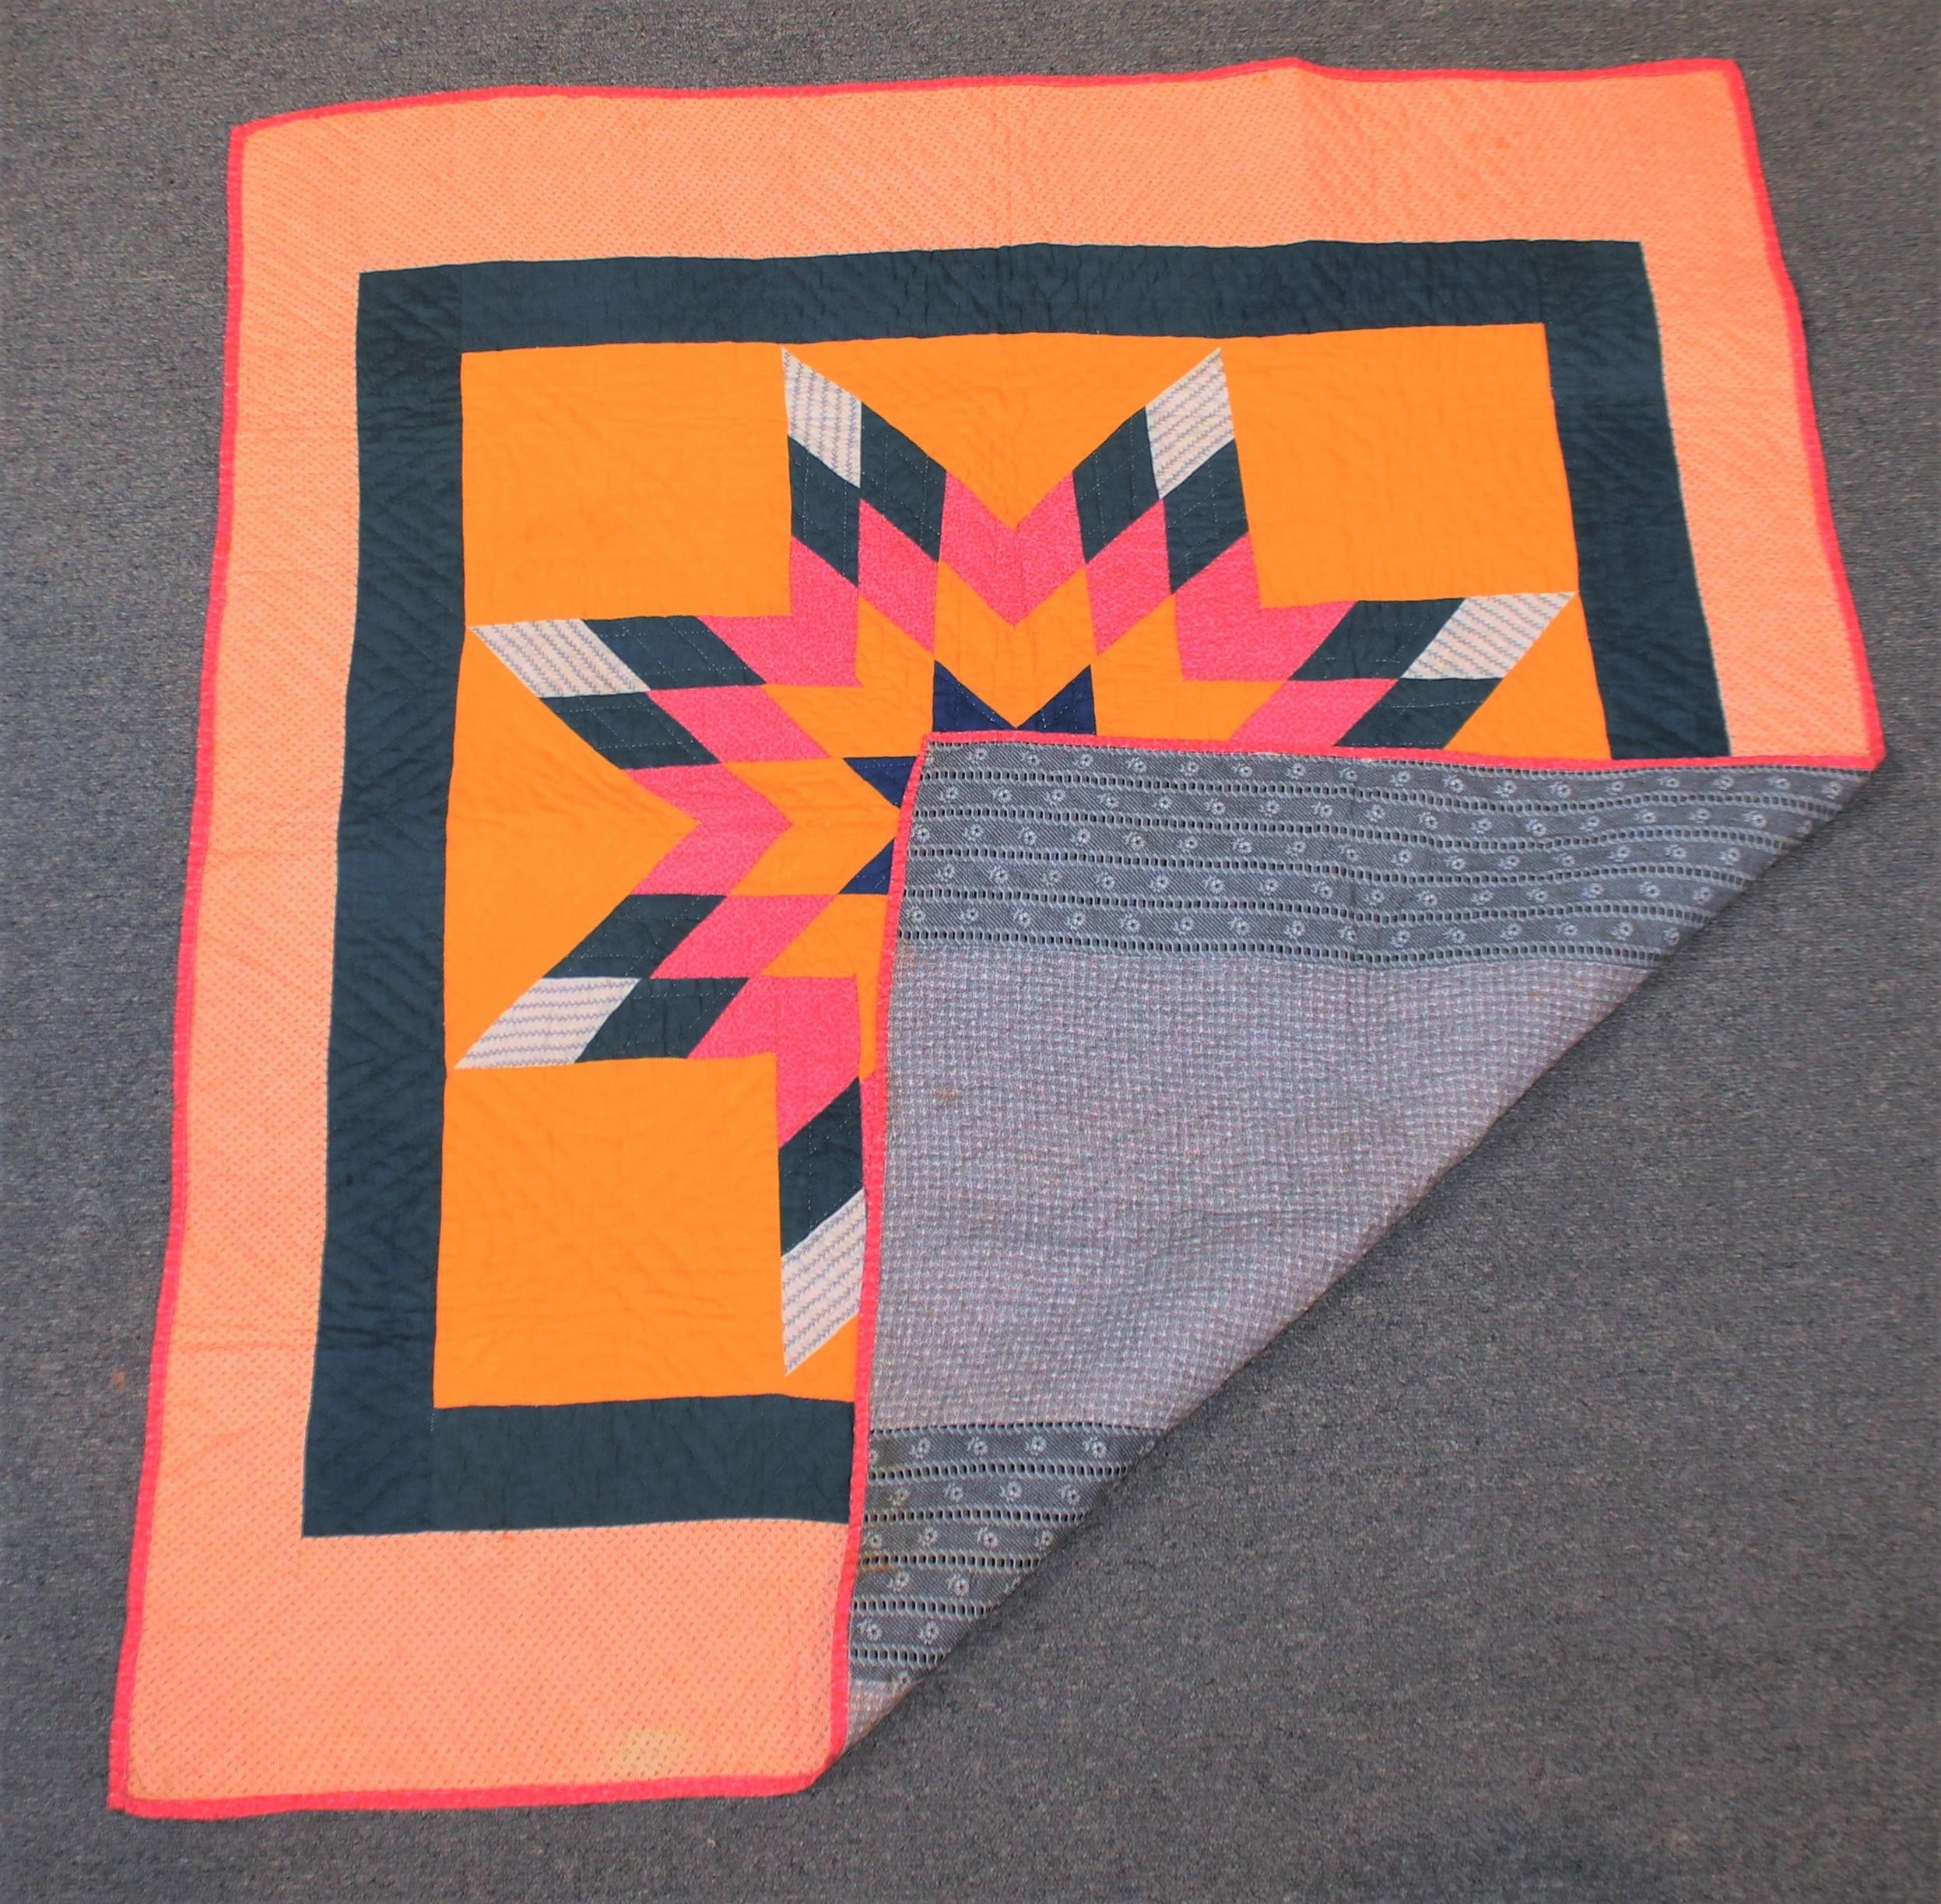 This fine eight point star crib quilt is in very Dutchy colors and is from Berks County, Pennsylvania. The condition is very good with very vivid colors. The backing has some water marks not does not detract from the beauty of this fine master piece.